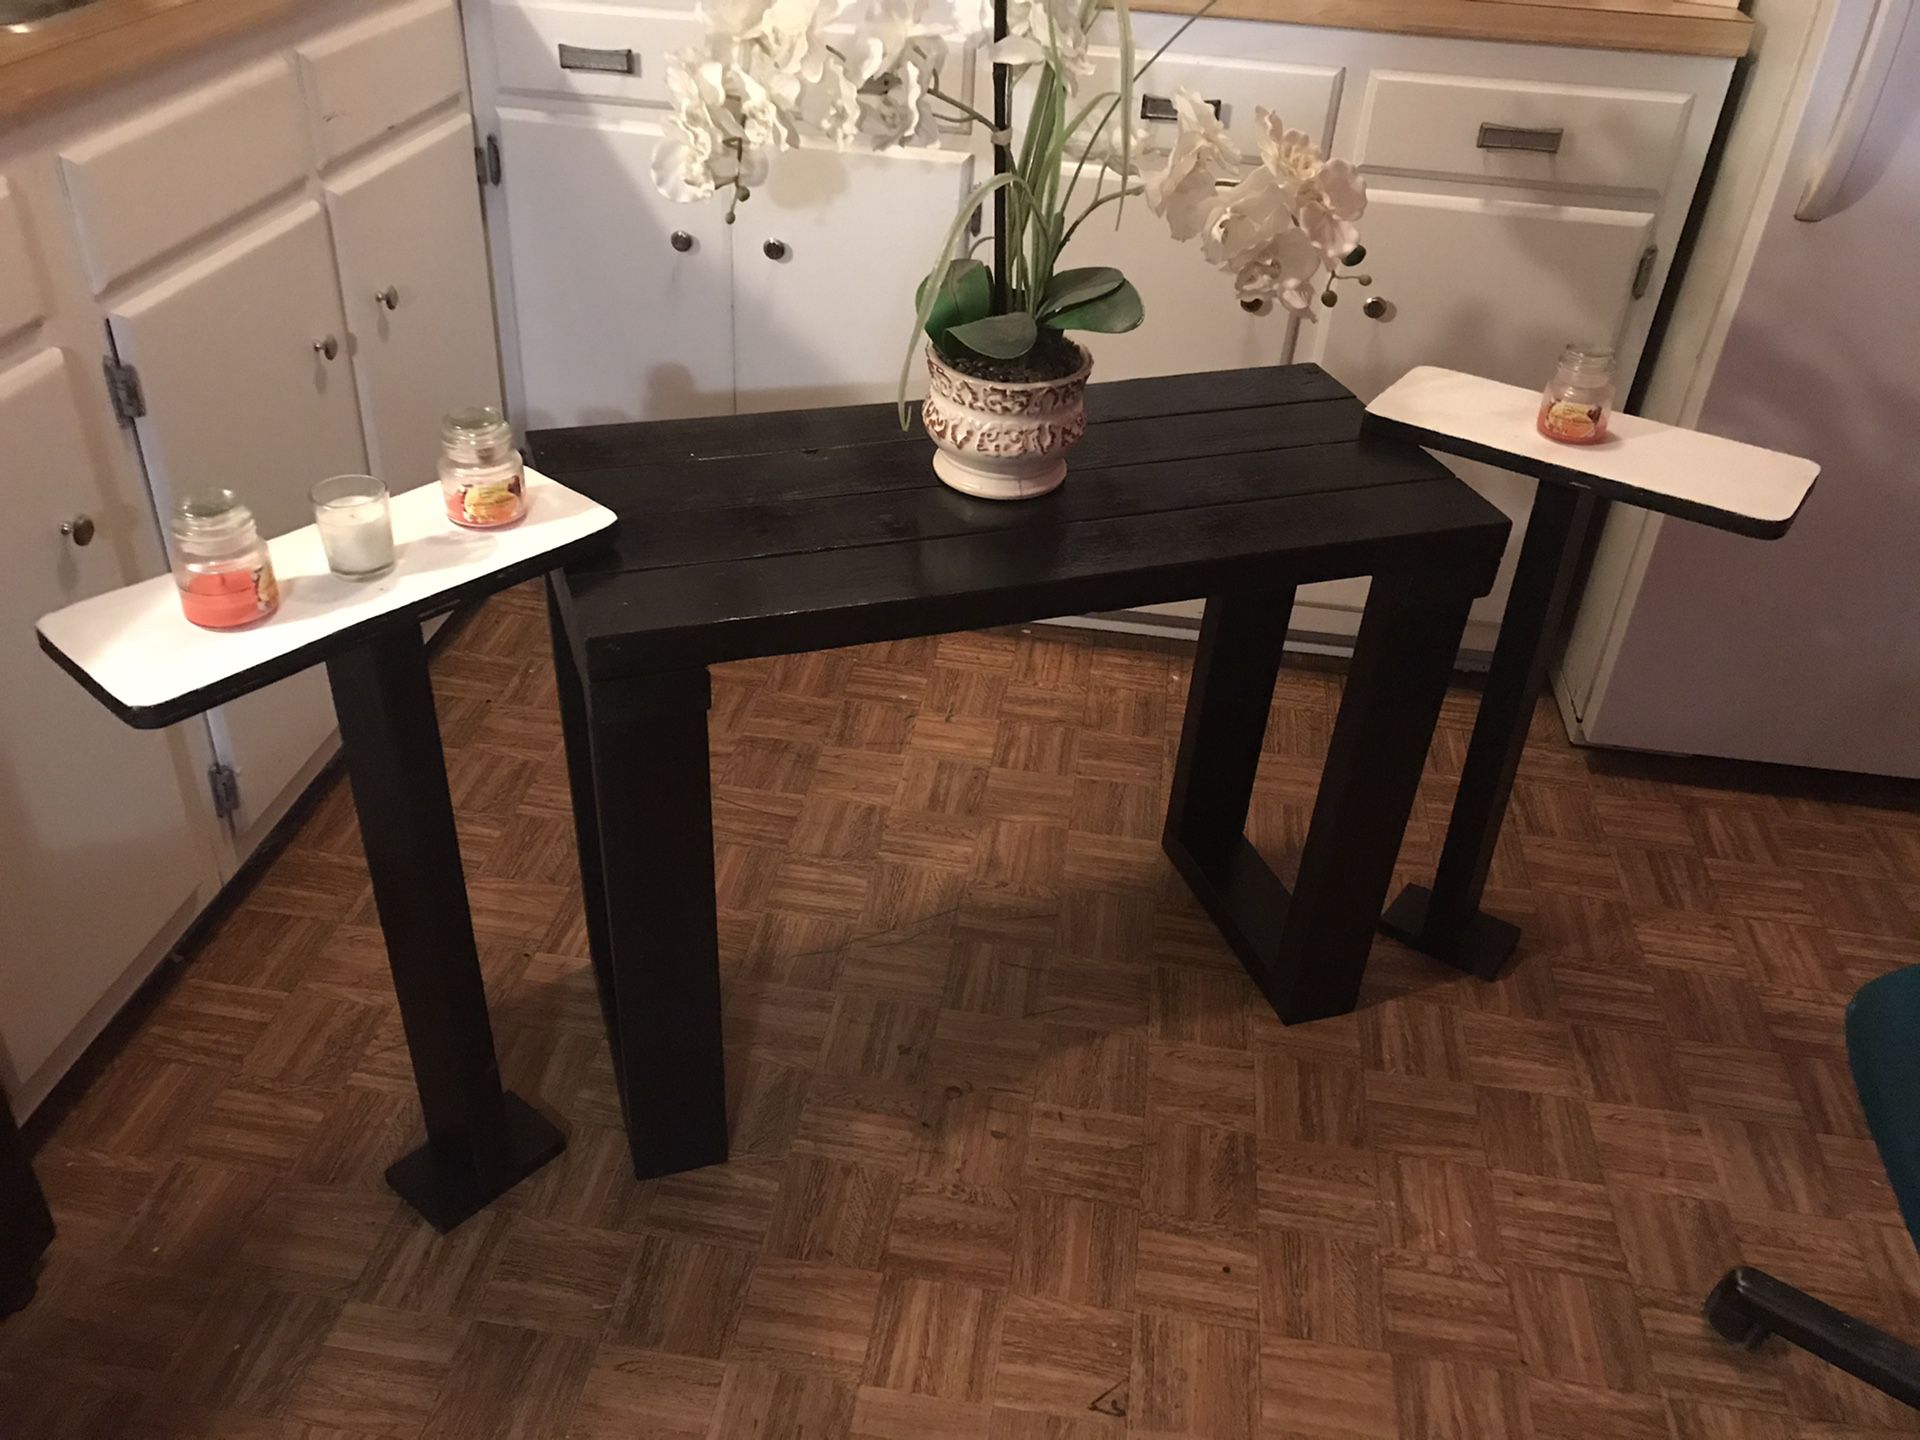 Coffee table with two matching side tables